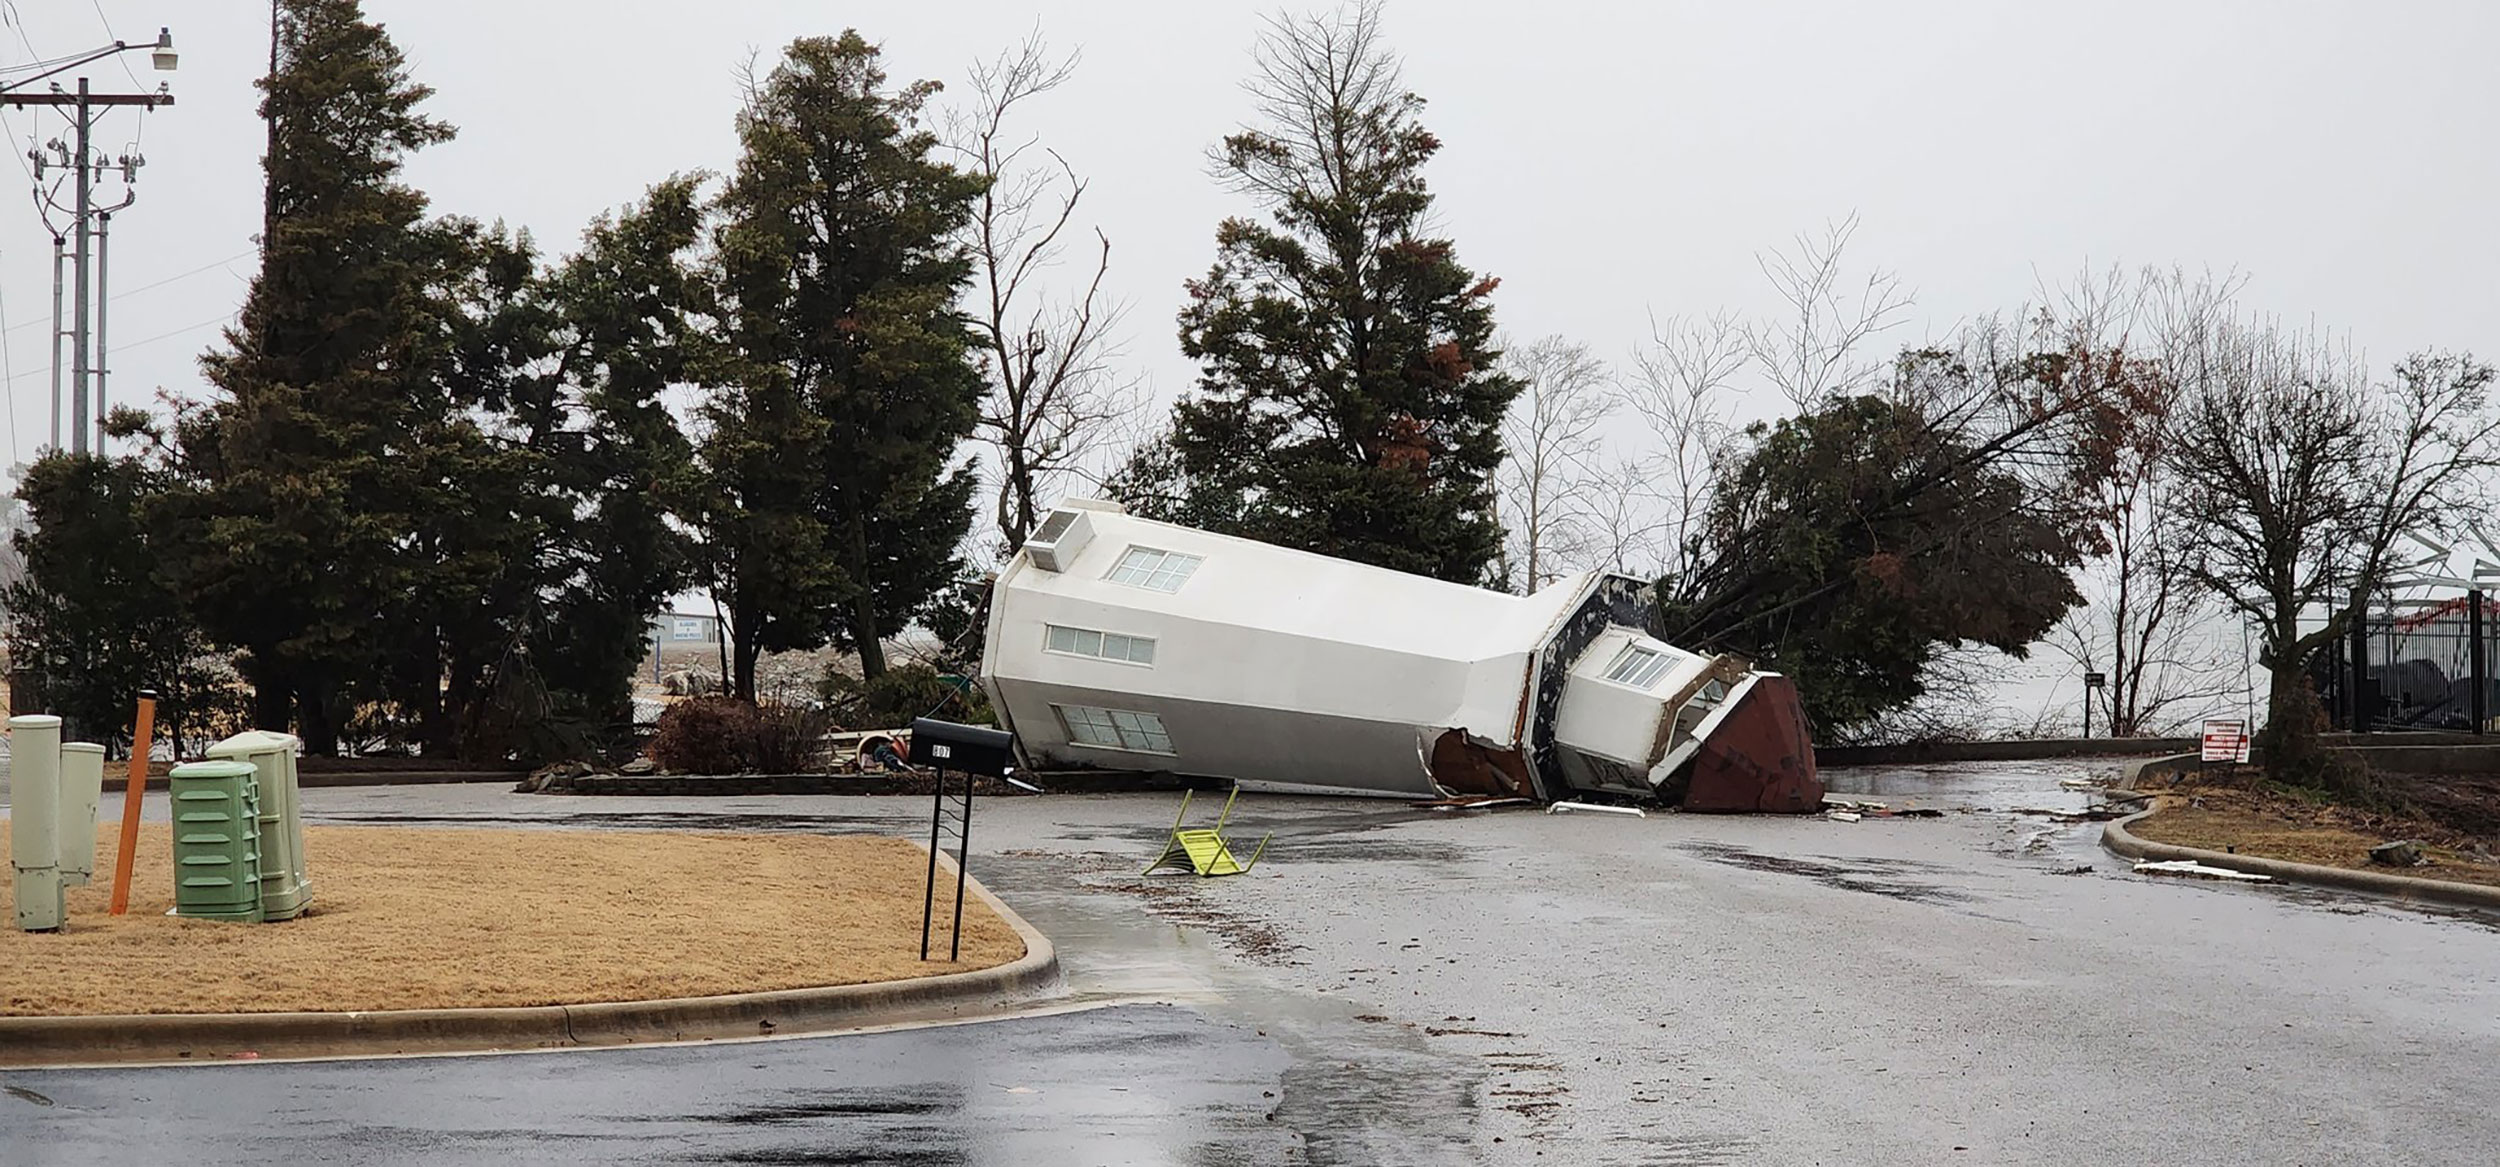 Damage is seen outside a hotel in Decatur, Alabama, on Thursday morning. Photo credit: Courtesy Mar...